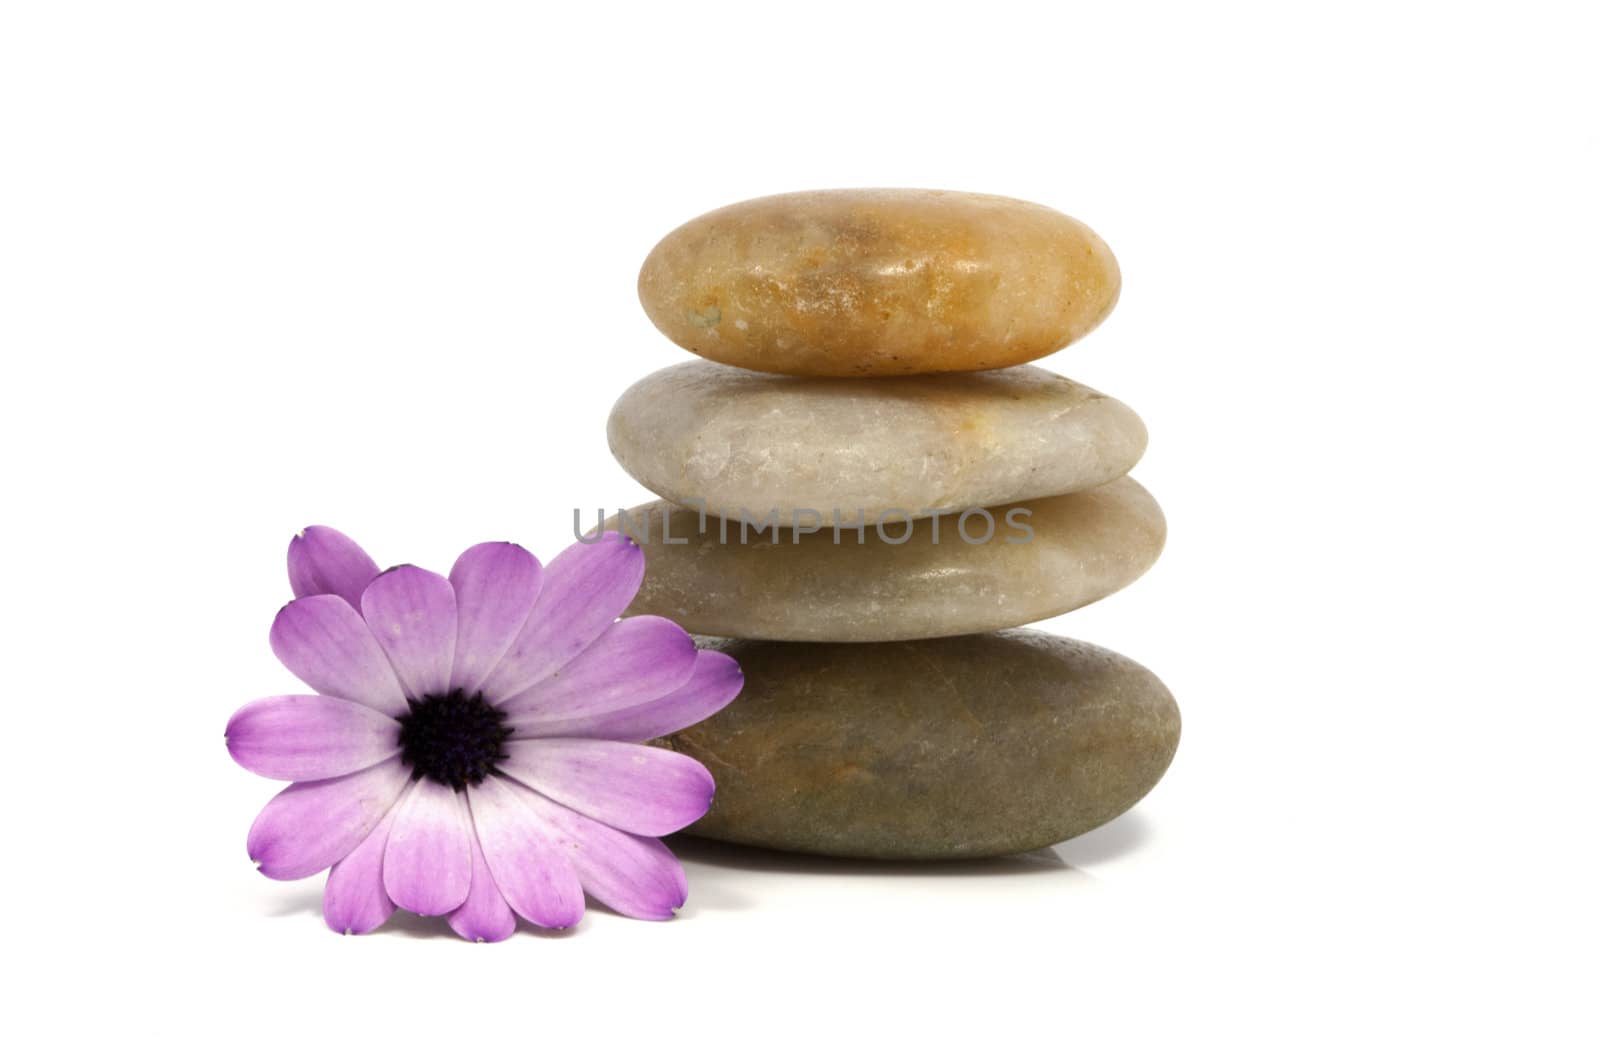 rocks with spanish daisy flower by compuinfoto